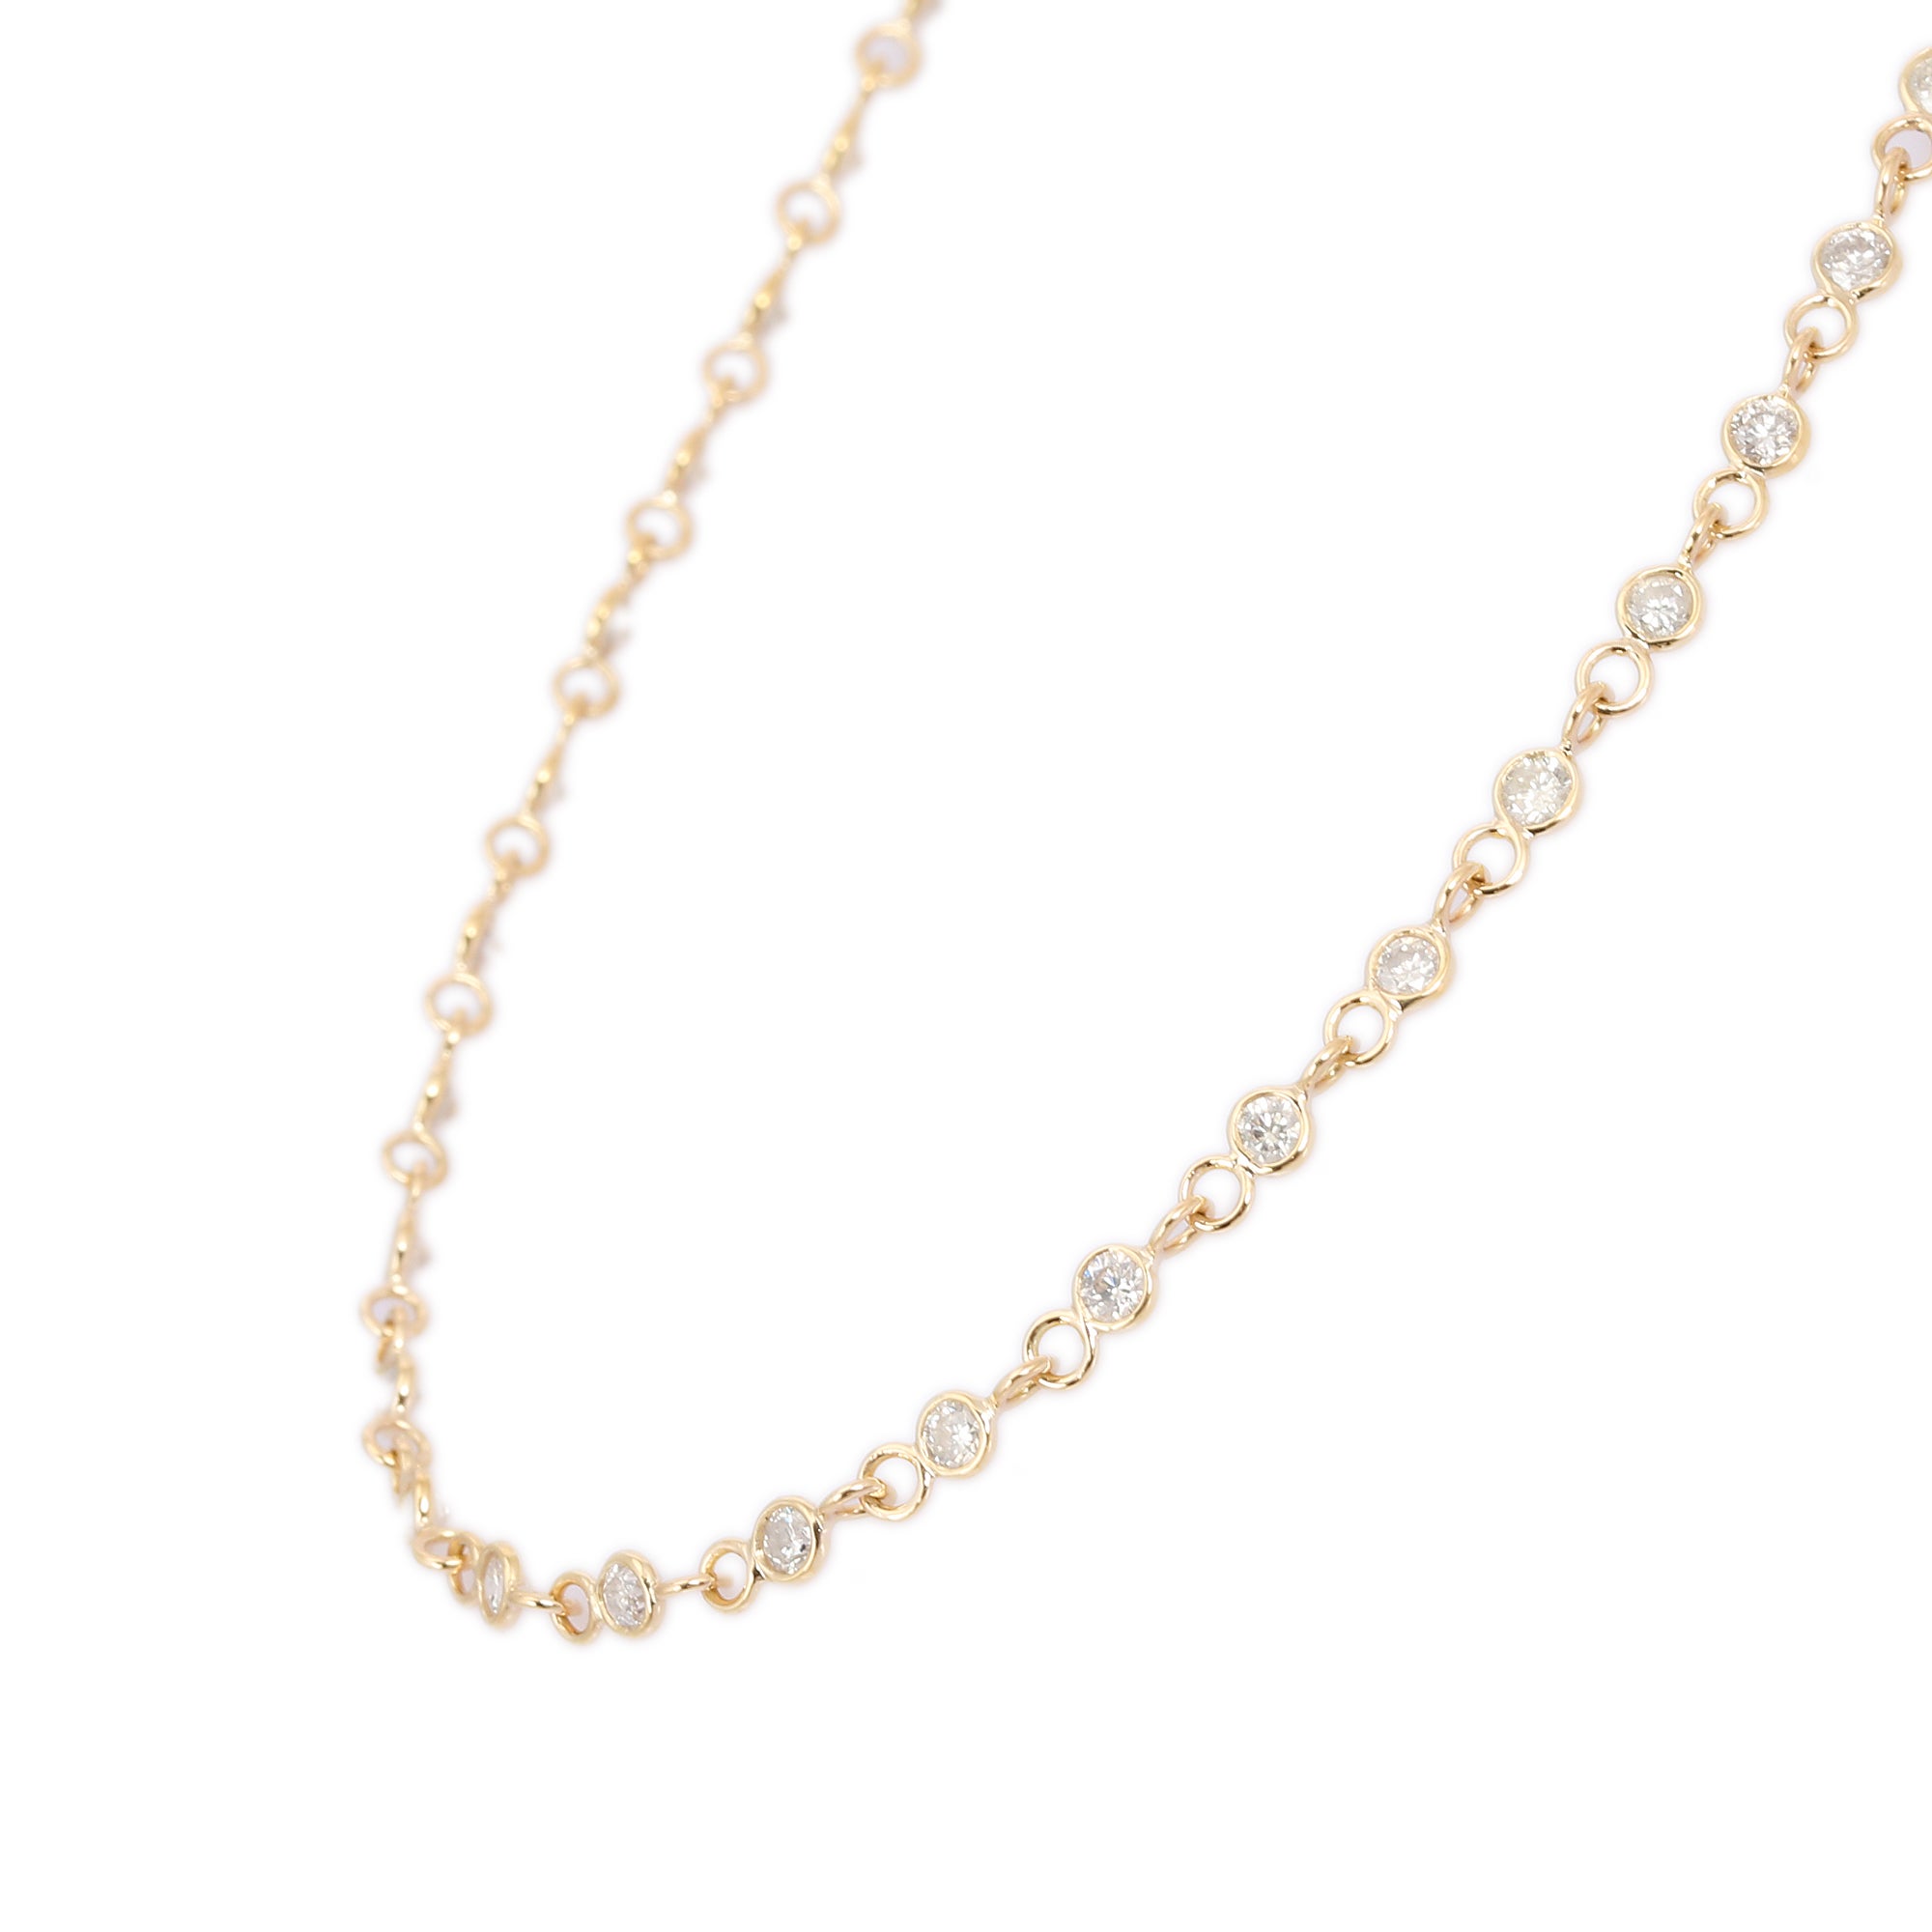 Modern Fine Diamond Long Necklace 14k Solid Yellow Gold, Christmas Gift For Women For Sale